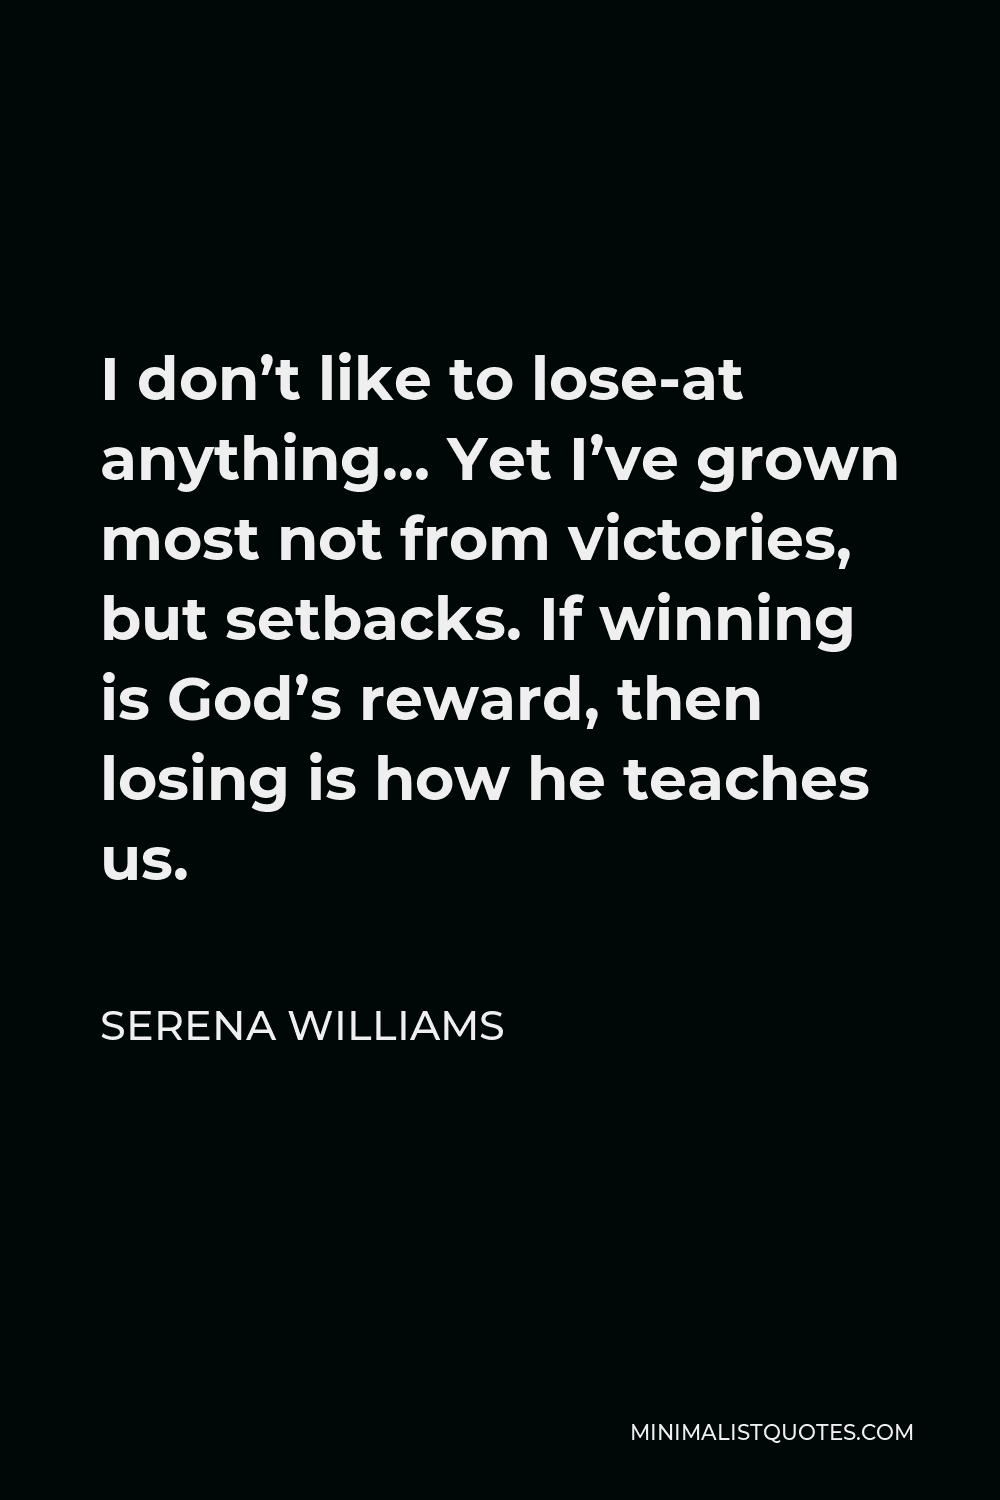 Serena Williams Quote - I don’t like to lose-at anything… Yet I’ve grown most not from victories, but setbacks. If winning is God’s reward, then losing is how he teaches us.